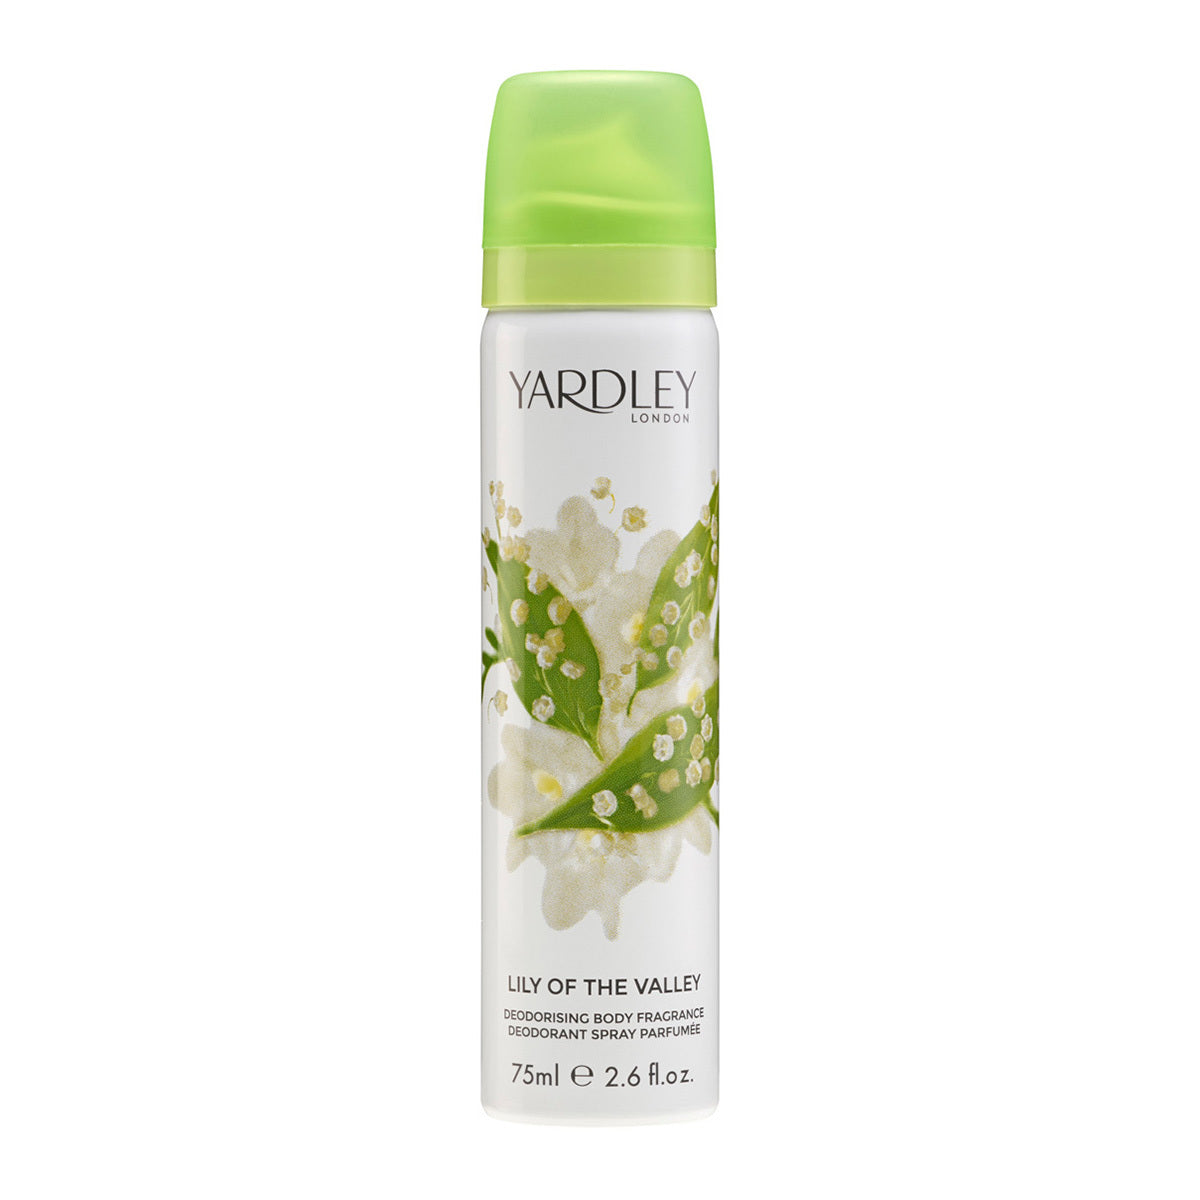 Primary image of Lily of the Valley Body Spray